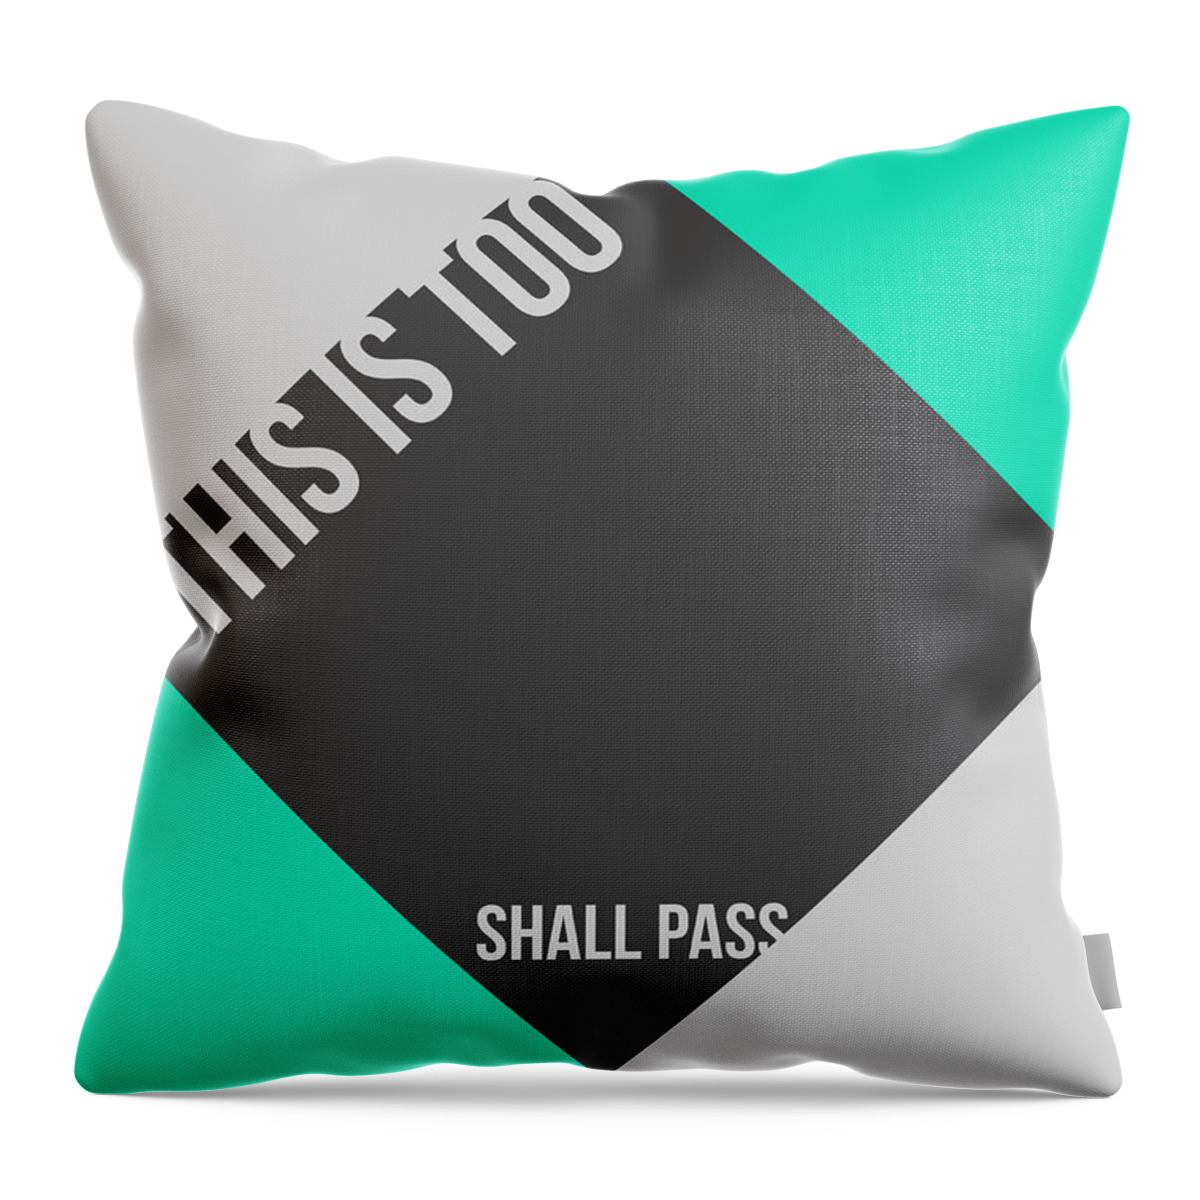 Quotes Throw Pillow featuring the digital art This is too shall pass Poster by Naxart Studio